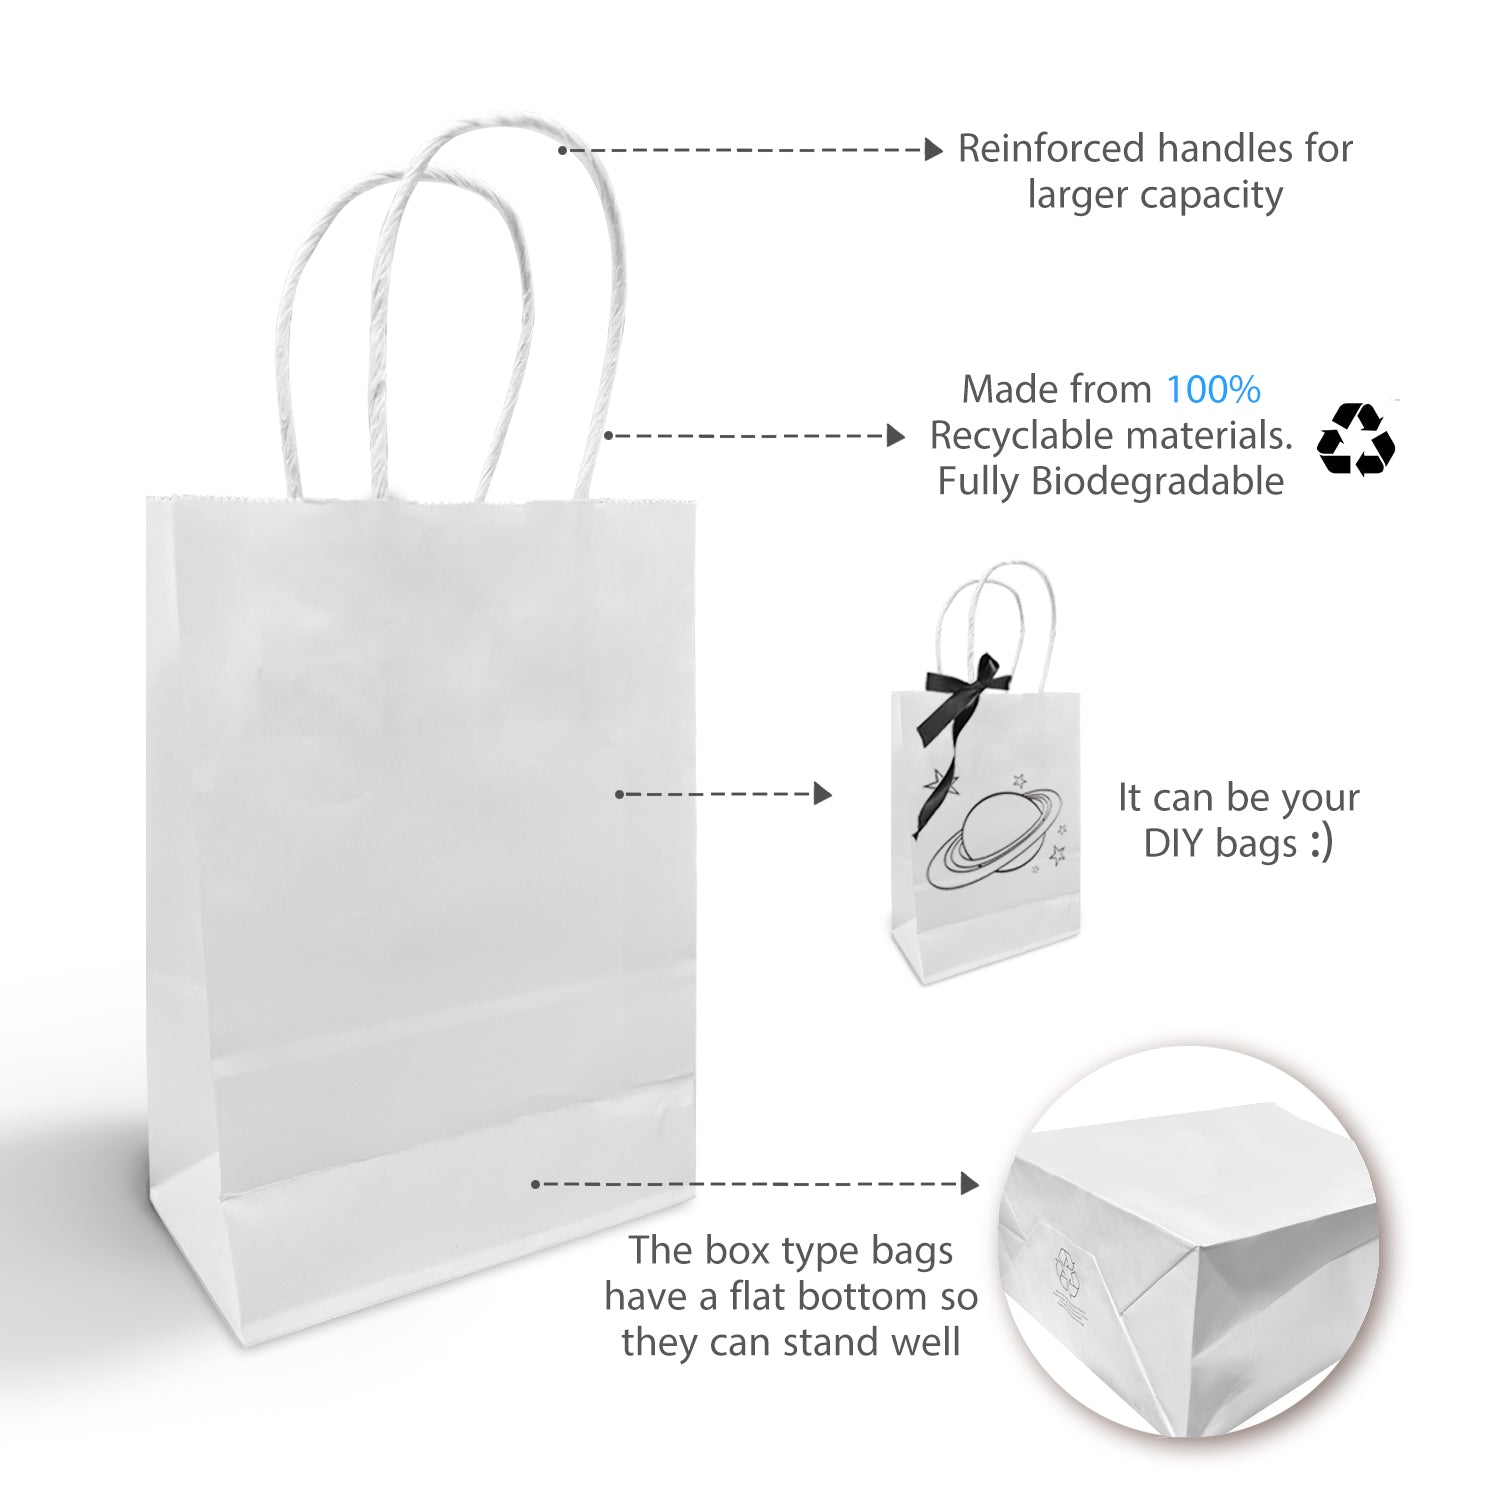 250 Pcs, Gem,  5.3x3.5x8.5 inches, White Paper Bags, with Flat Handle